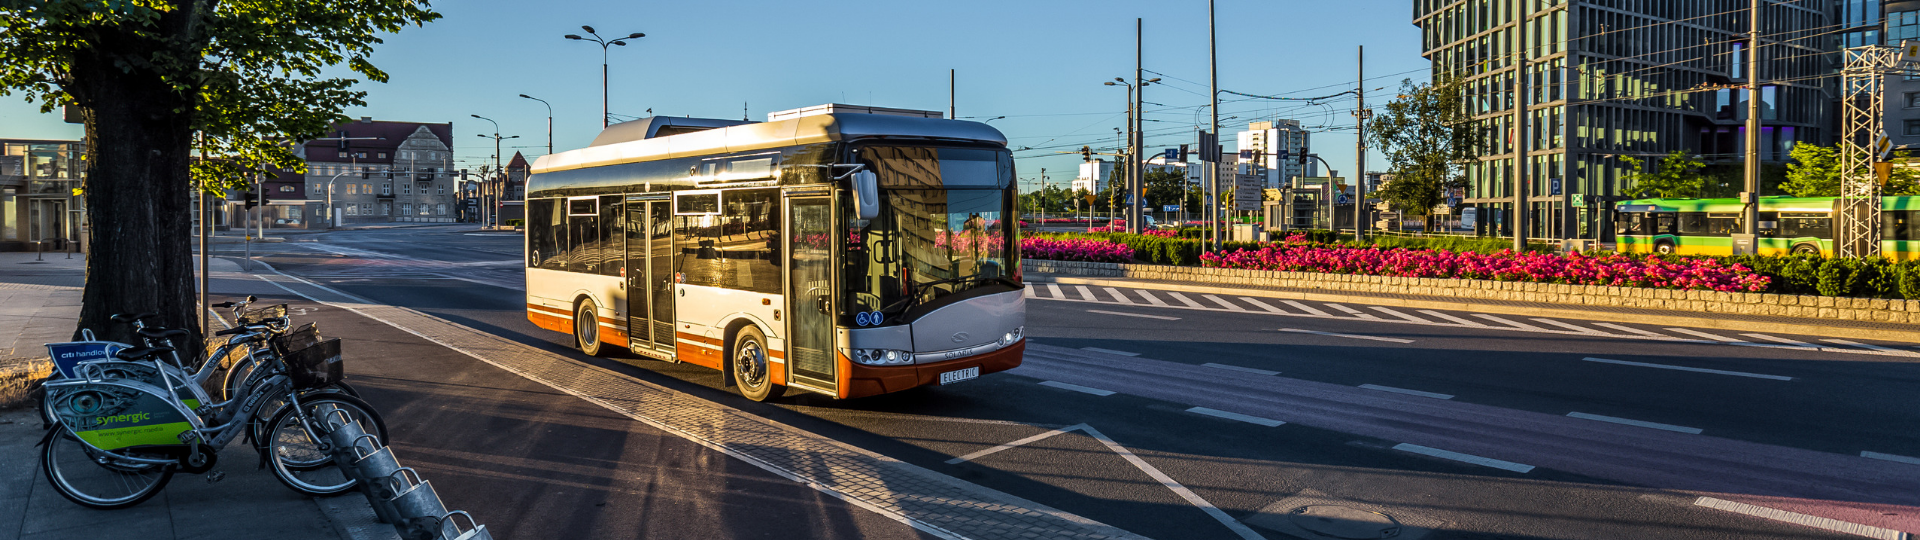 Solaris will provide electric buses to Paris